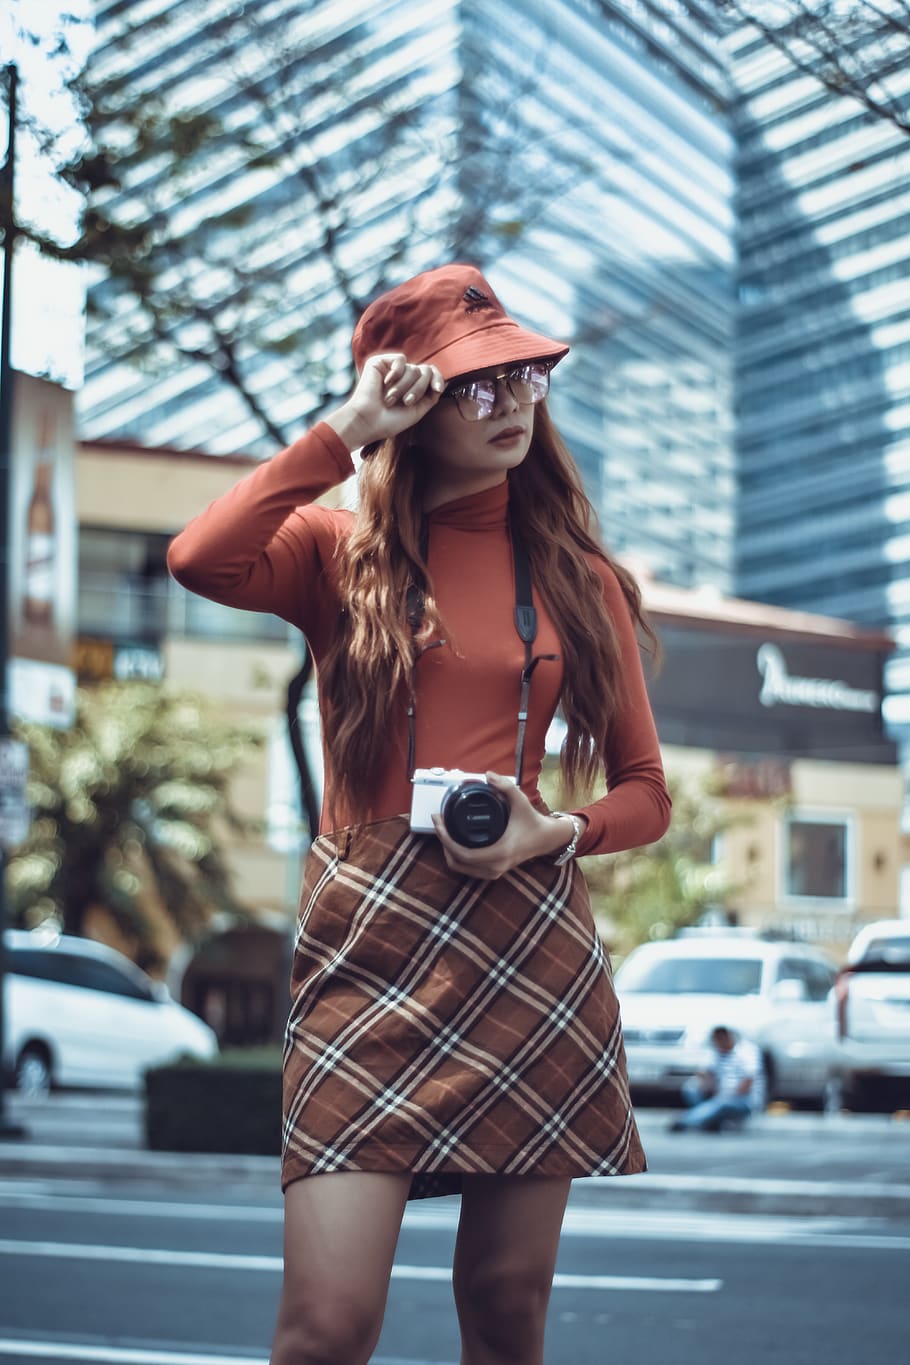 Woman Holding Her Hat While Holding Her Camera, #girl, #lady